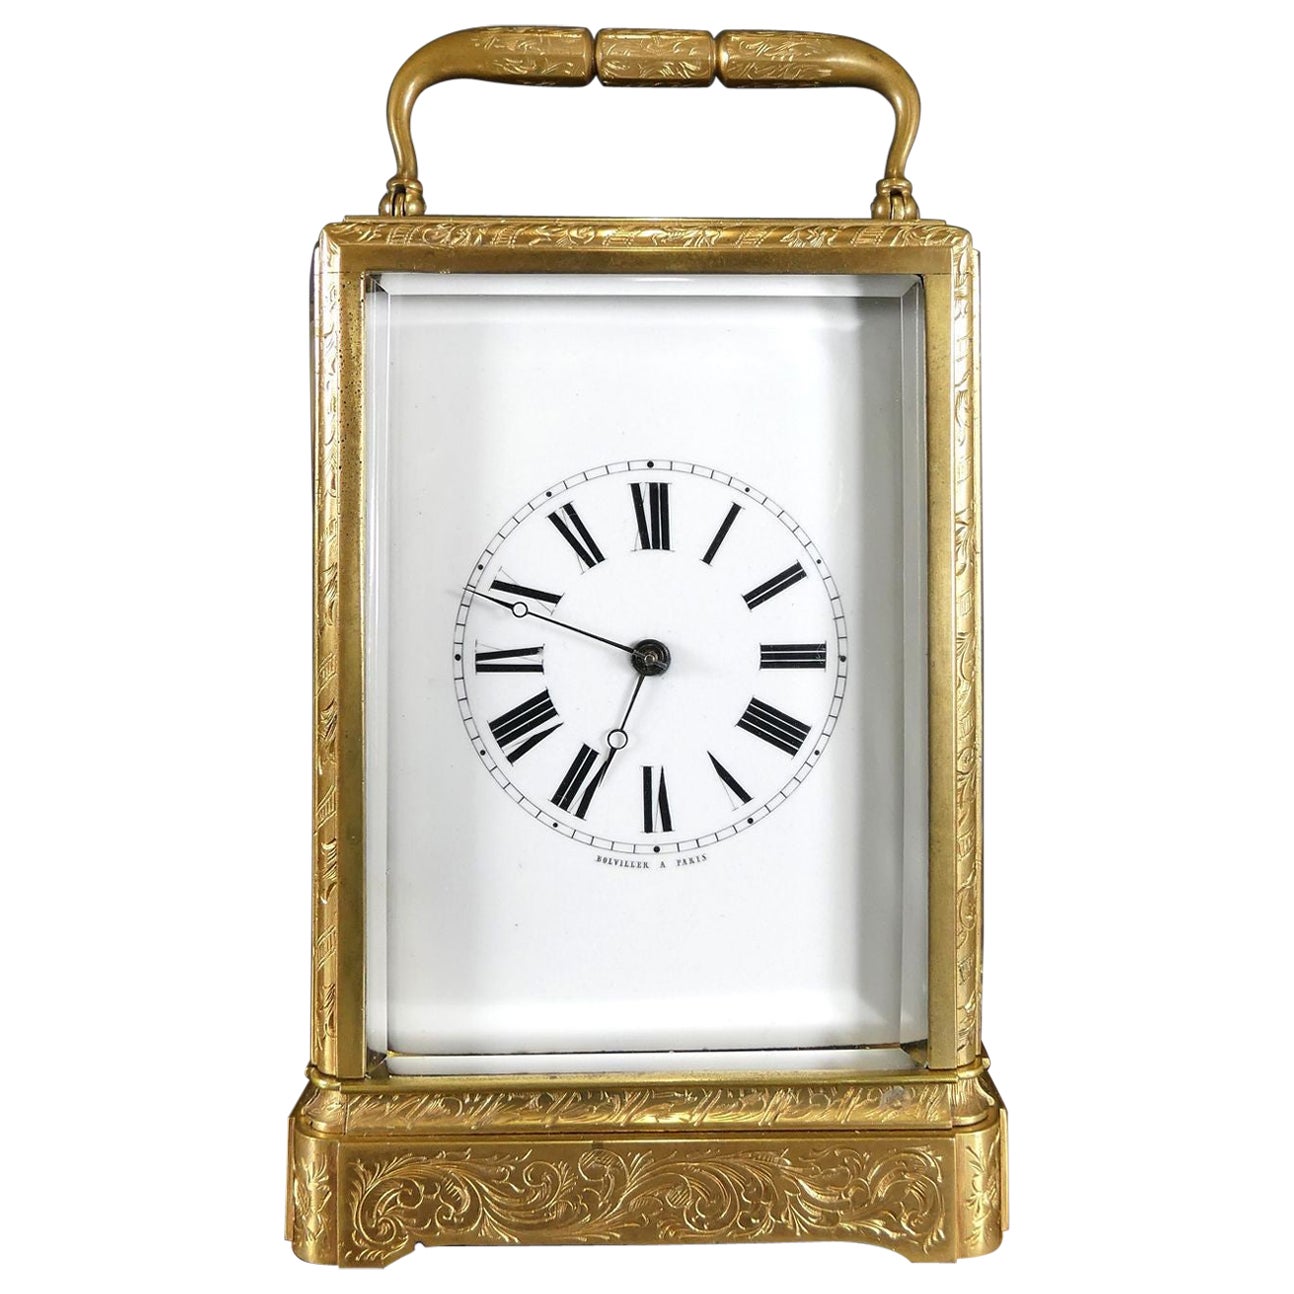 Fine Engraved Striking Carriage Clock by Bolviller For Sale